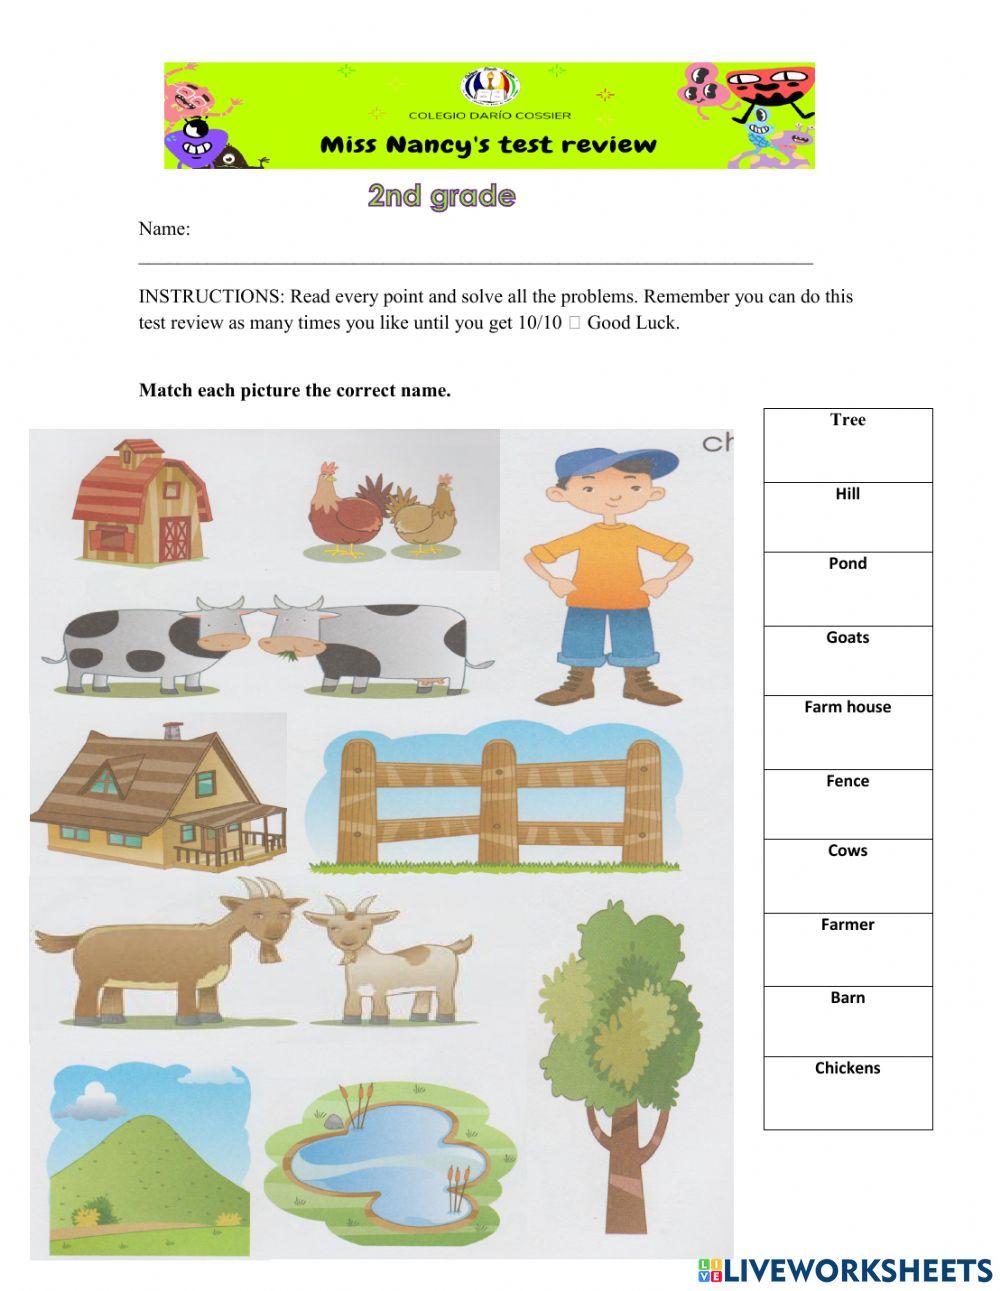 INGLÉS-Test review 2nd grade. Agosto